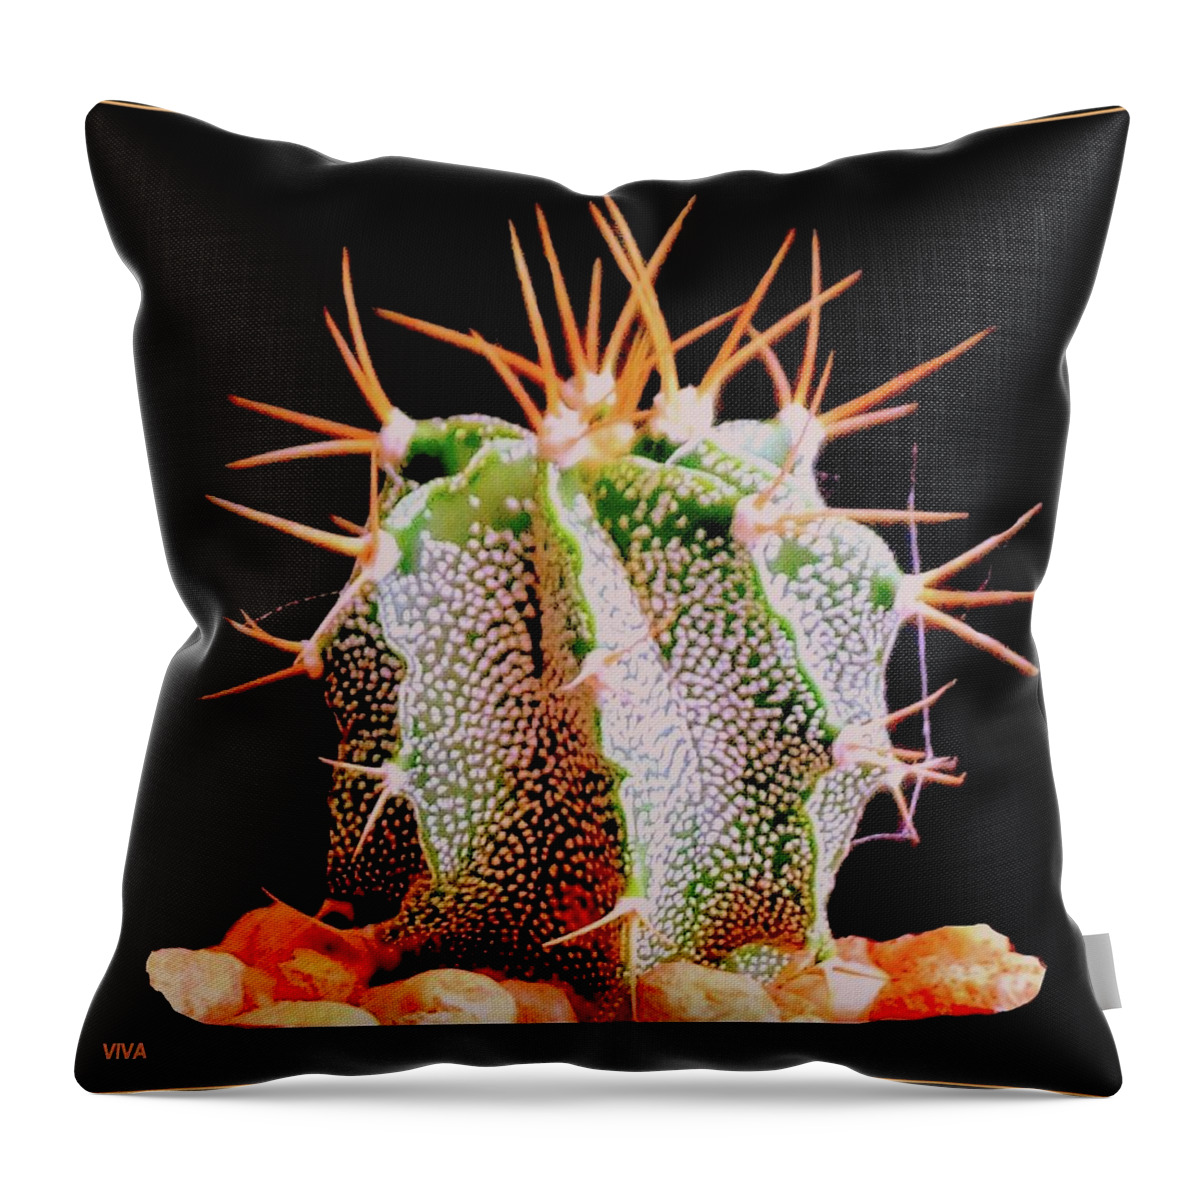 Cactus Throw Pillow featuring the photograph Crazy Cactus by VIVA Anderson